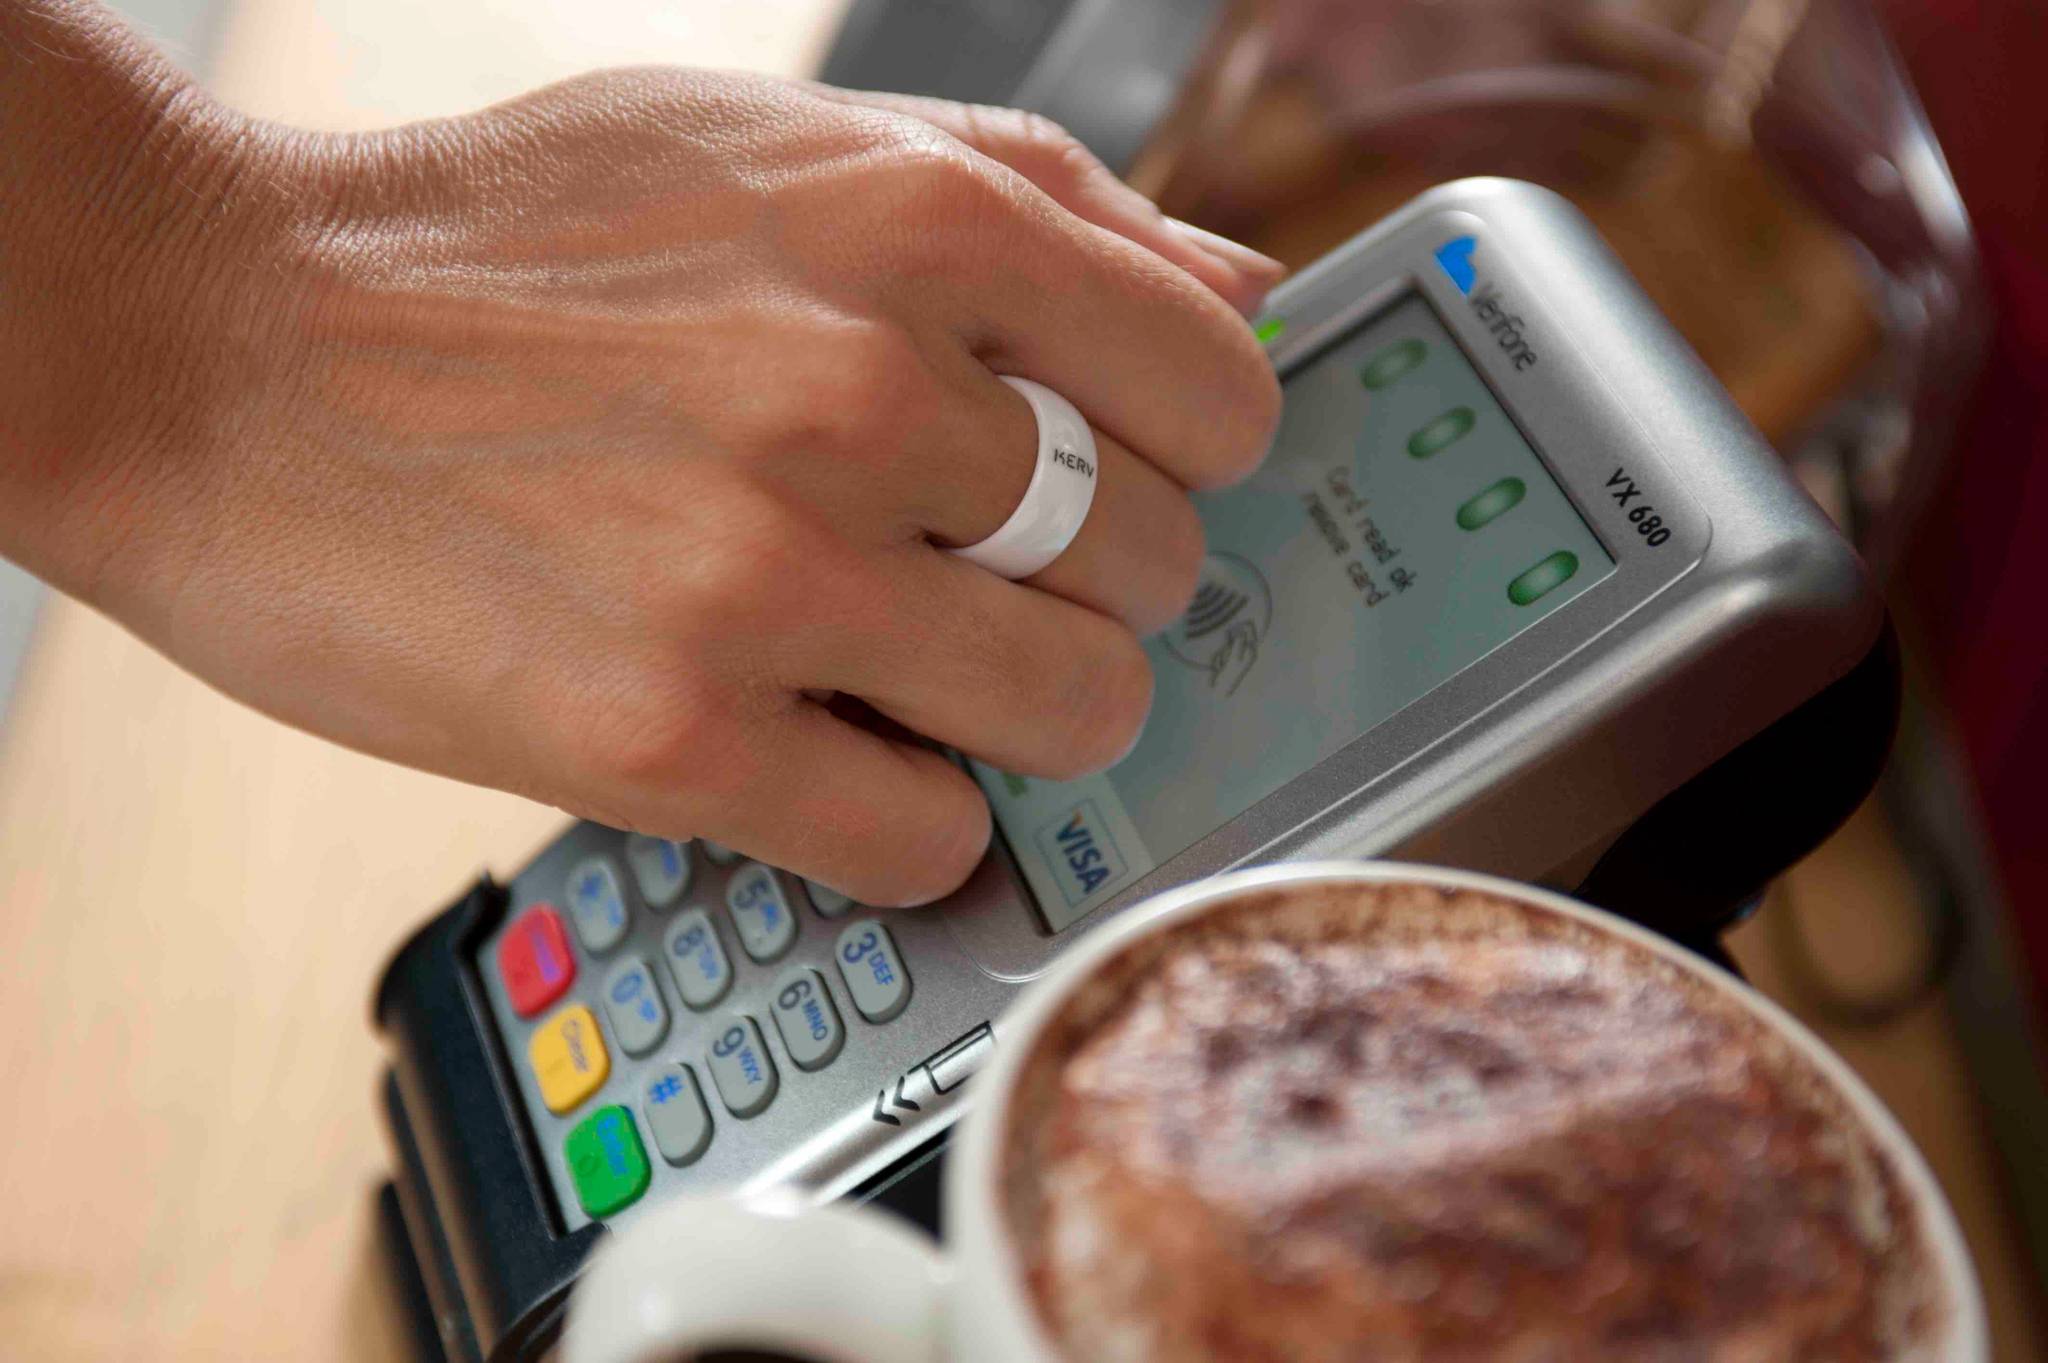 Kerv is a contactless payment ring